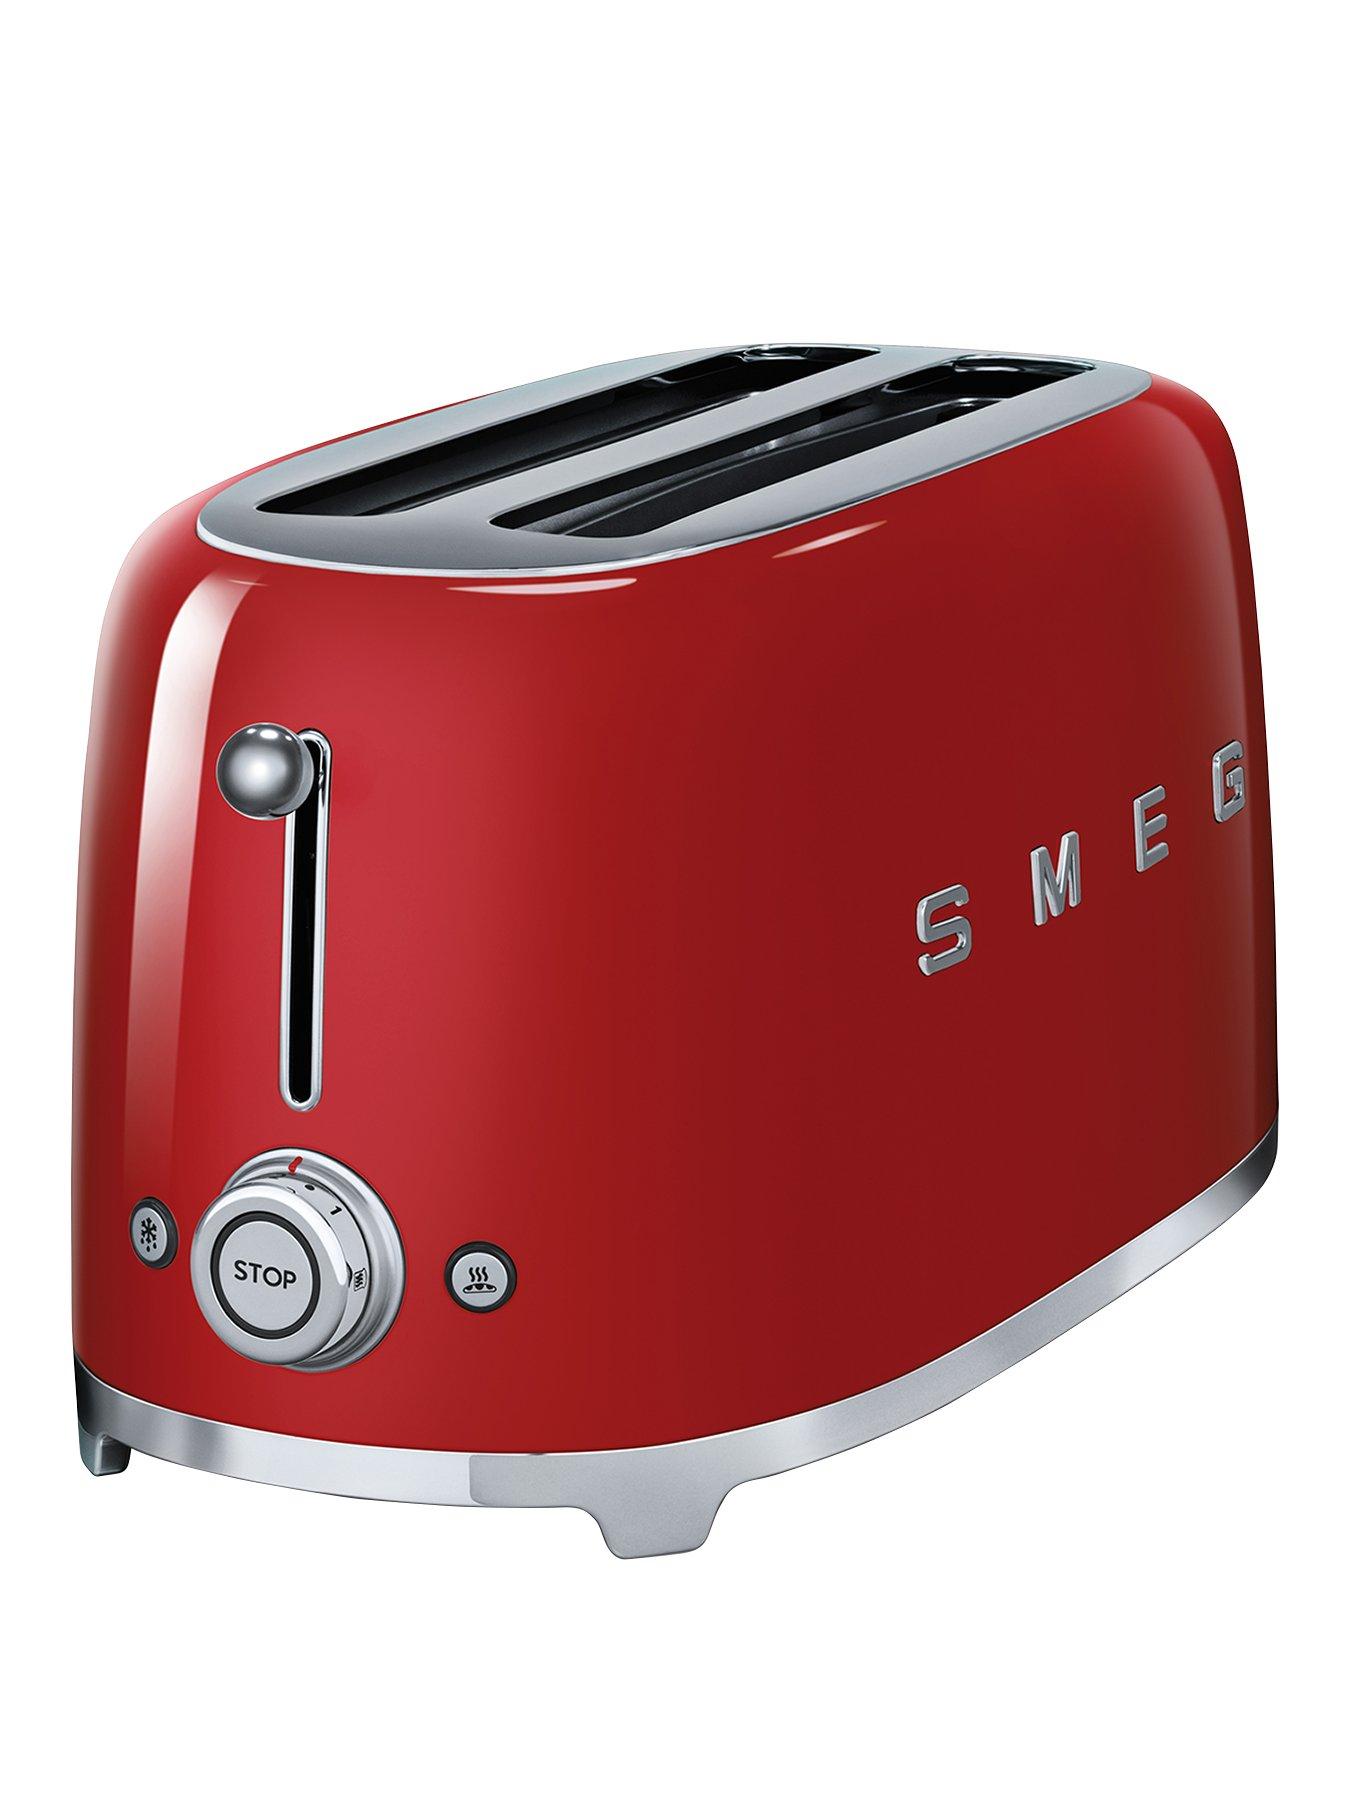 Smeg Tsf02 4-Slice Toaster - Red Review thumbnail